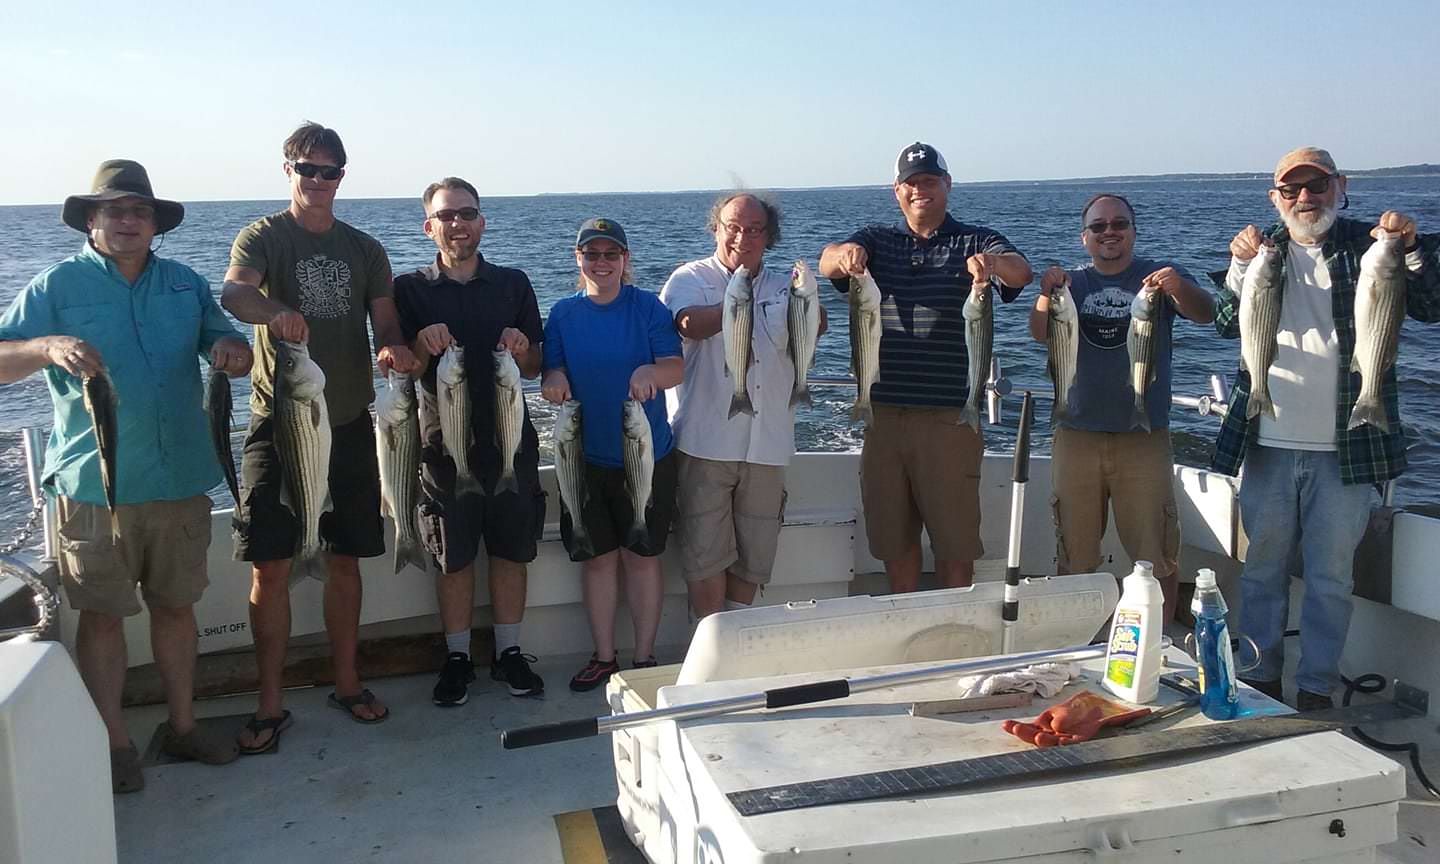 Another Fantastic Day of Fishing on the Chesapeake Bay!